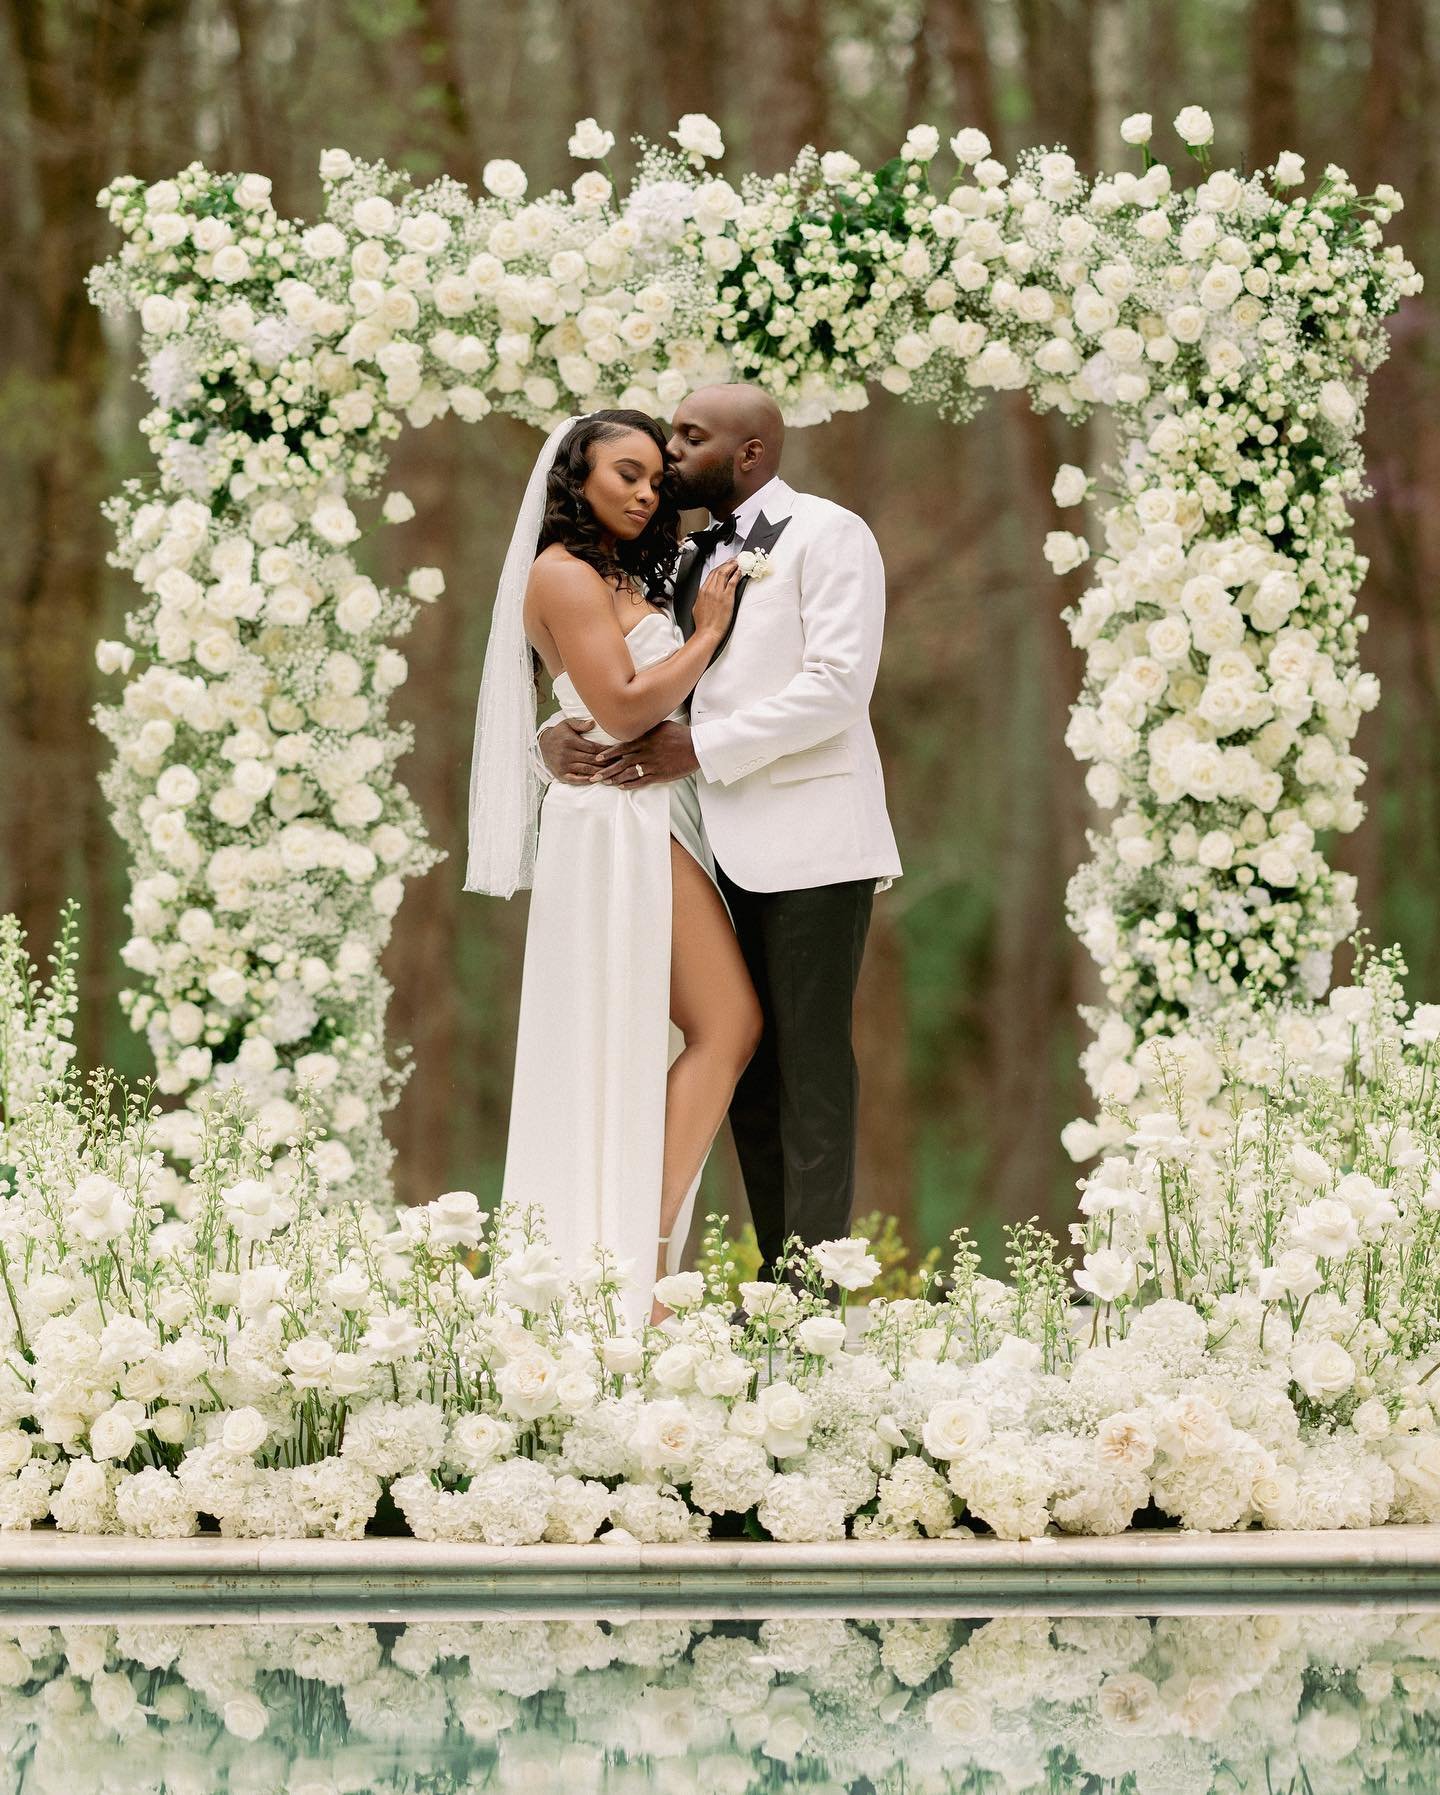 We love intimate vow renewals! @whit_stewart and @bamabred24 huge congratulations on celebrating 10 years of marriage!
&mdash;
Planning/Design: @lancelamardevereux
@designsbydevereux
Photography: @photosbyreem
Hair: @eleven23experience_
MUA: @tai_inv